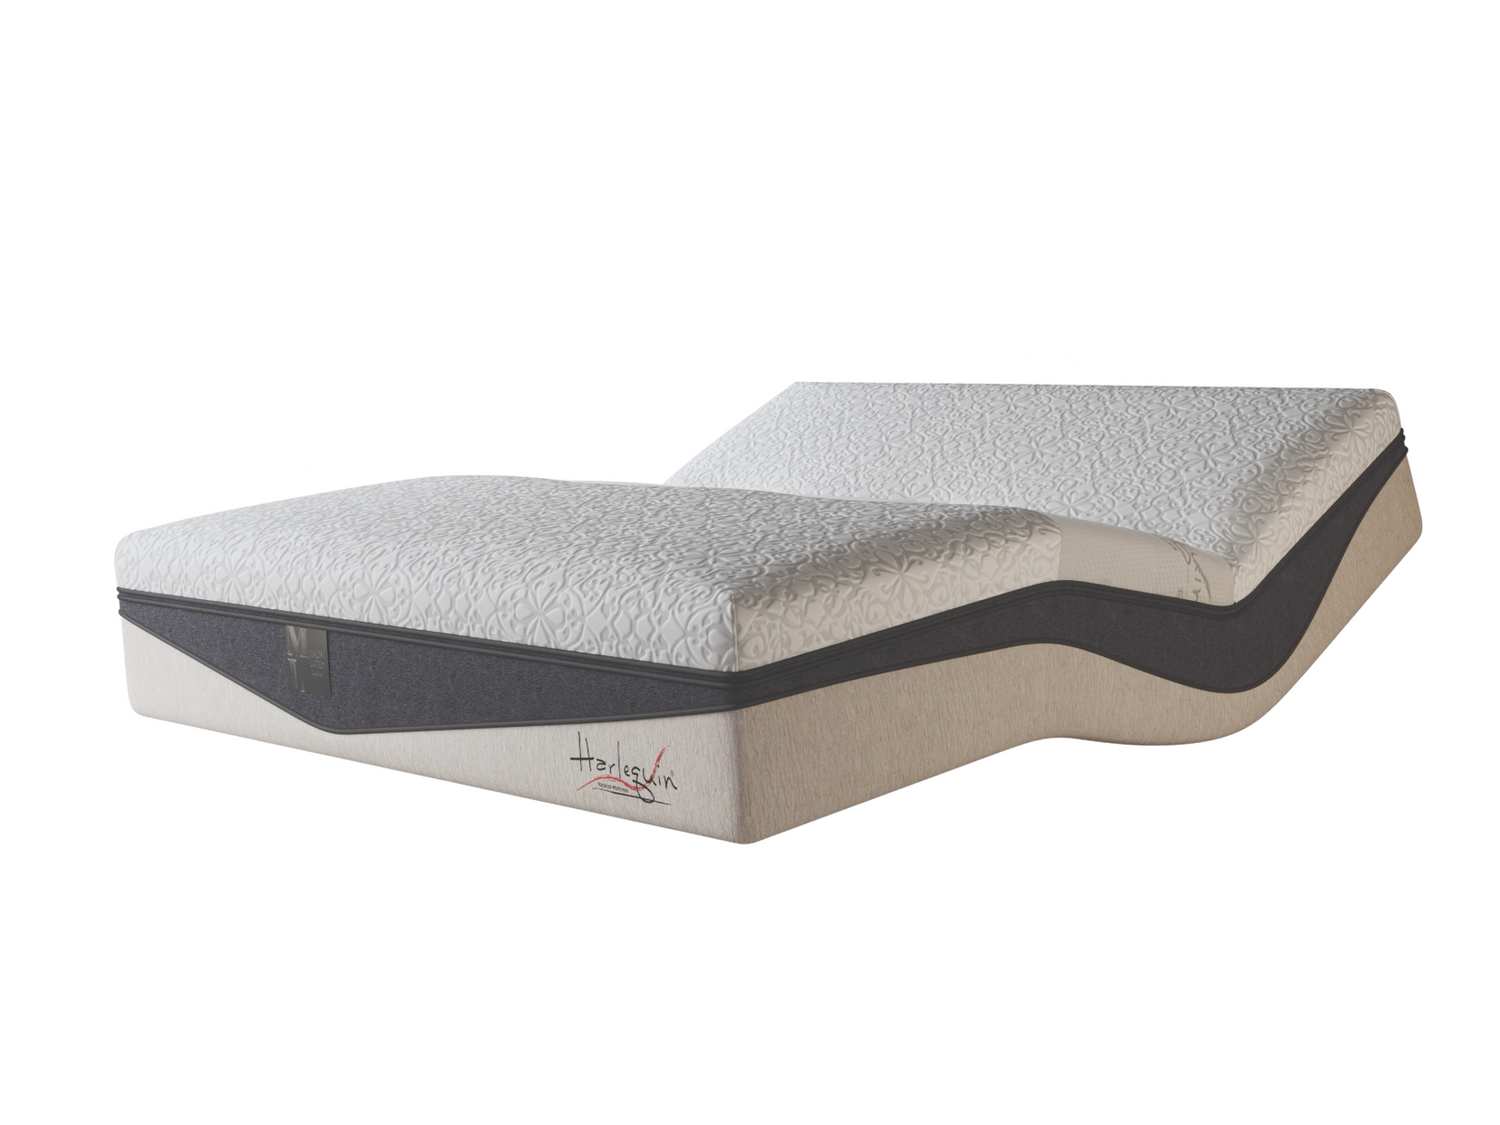 The Only Adjustable Mattress That Does Not Require a Base for Optimal Support